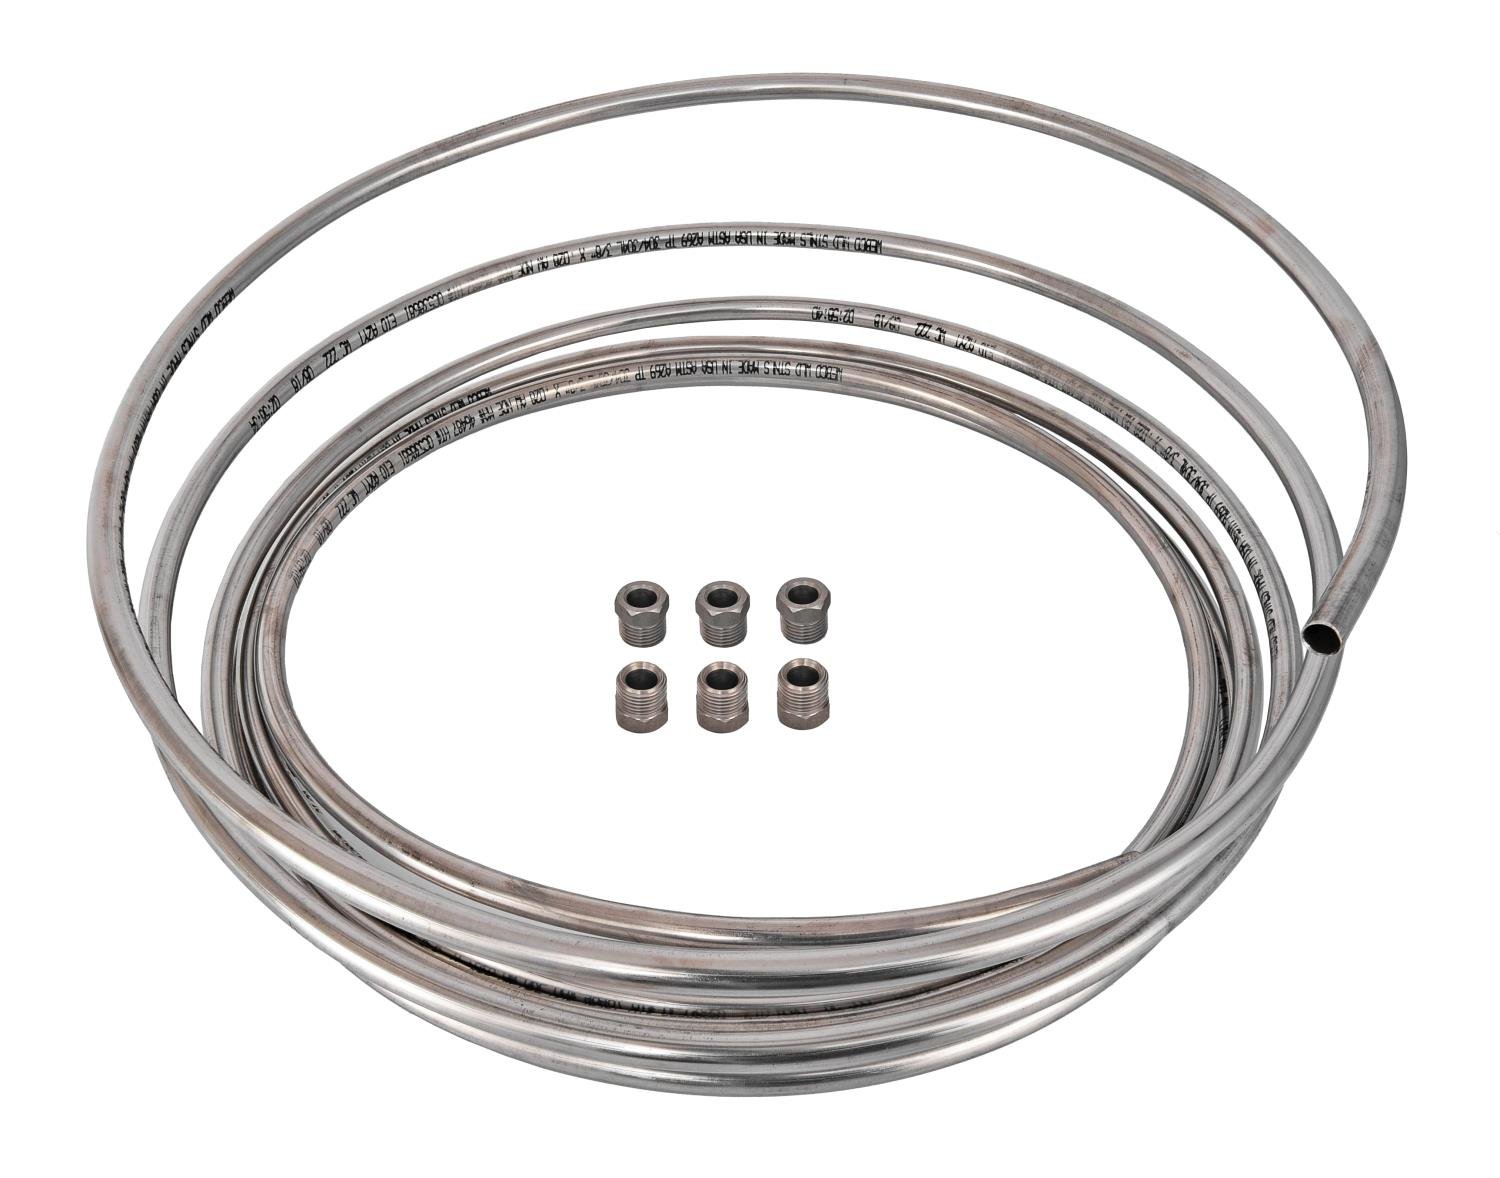 Stainless Steel Fuel Line Coil Kit, 3/8 in. O.D. x .028 in. Wall